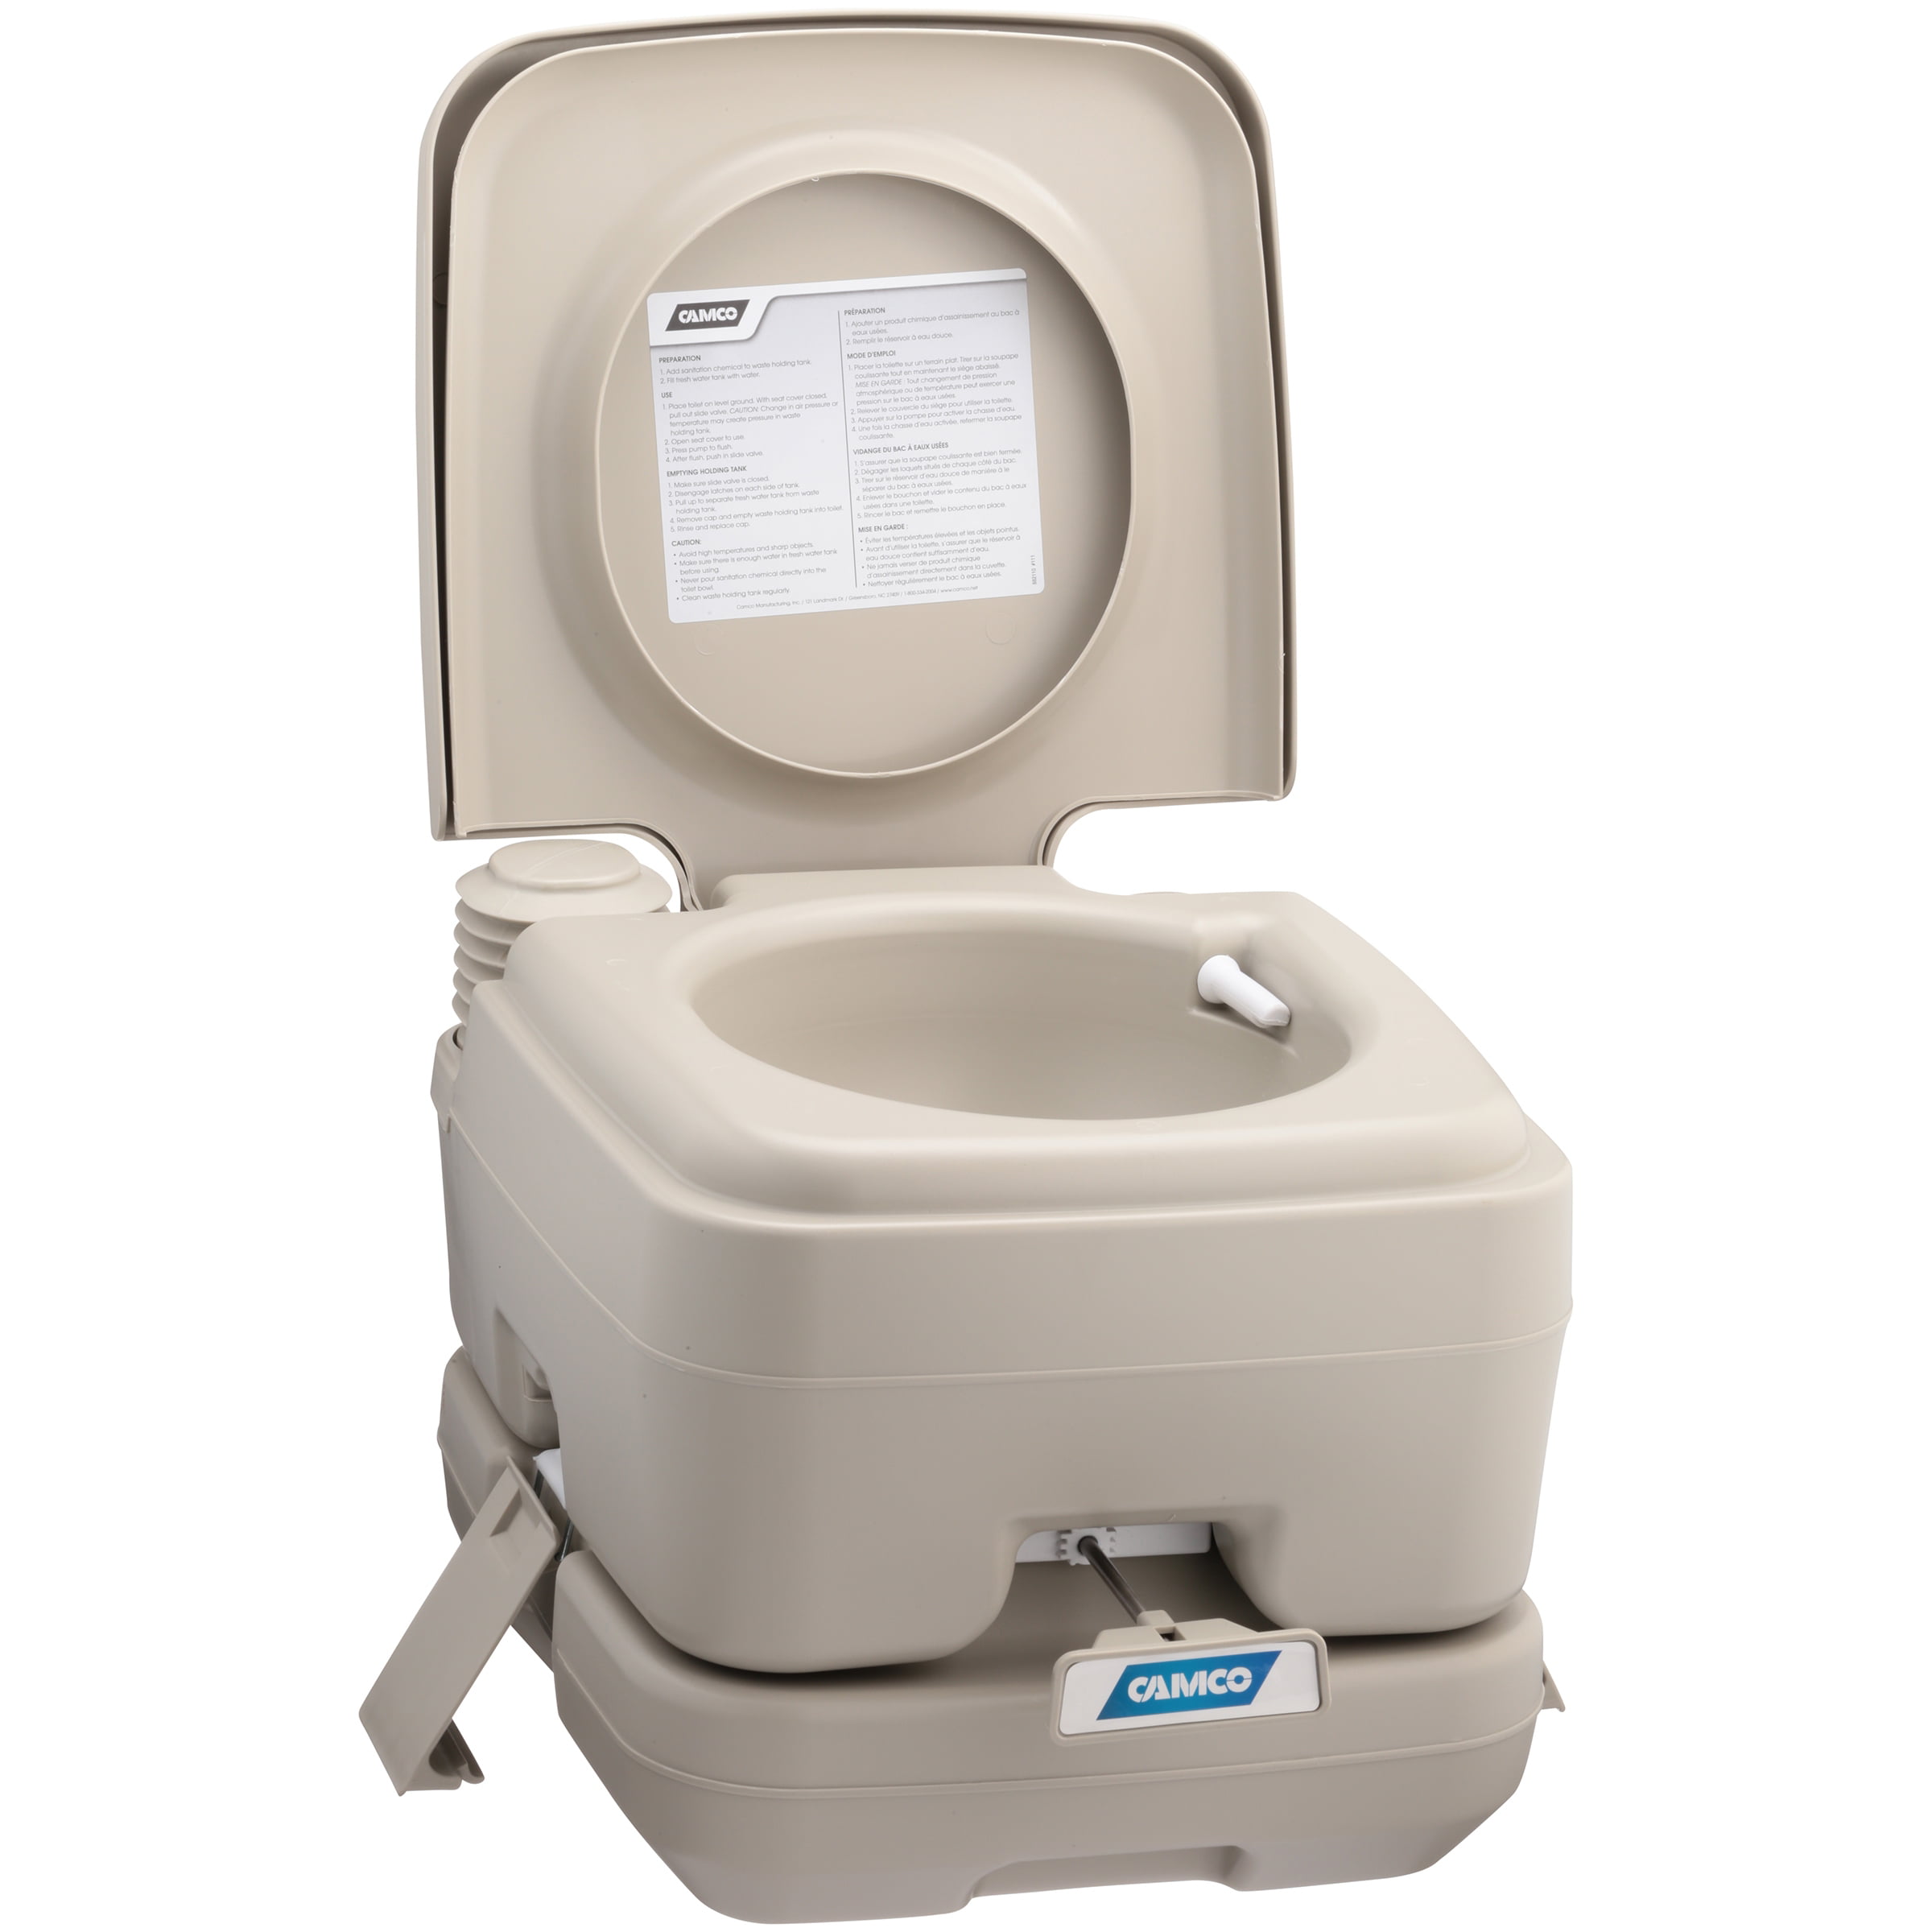 Camco 2.6-Gallon Portable Travel Toilet-Designed for Camping, RV, Boating  and Other Recreational Activities